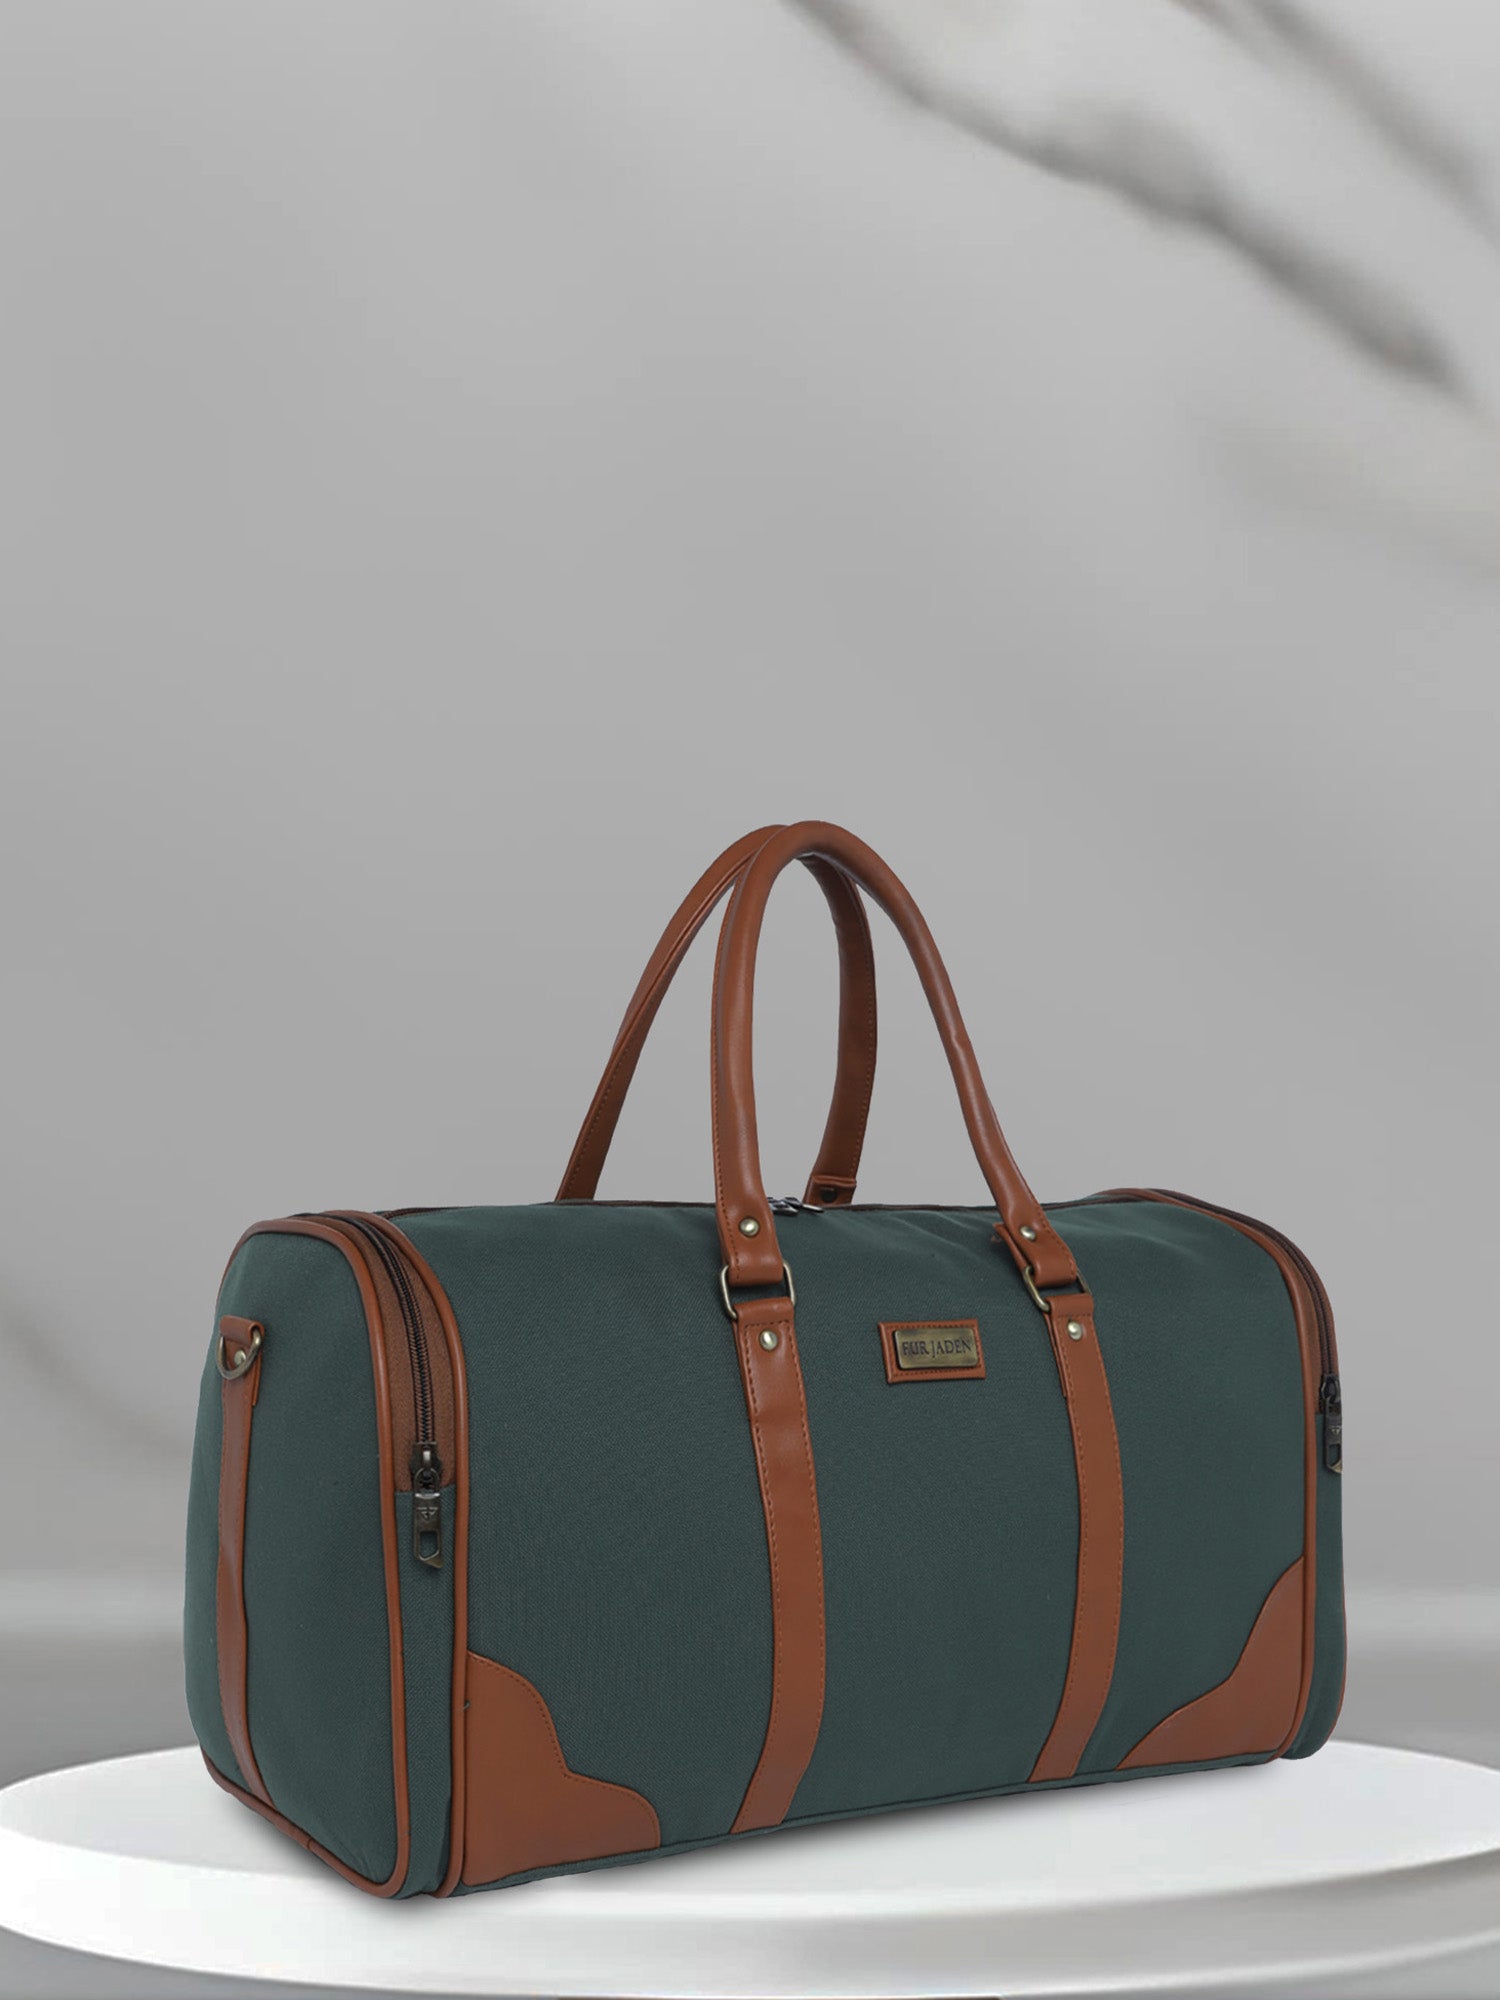 Pine Green Recycled Canvas & Vegan Leather Travel Duffle